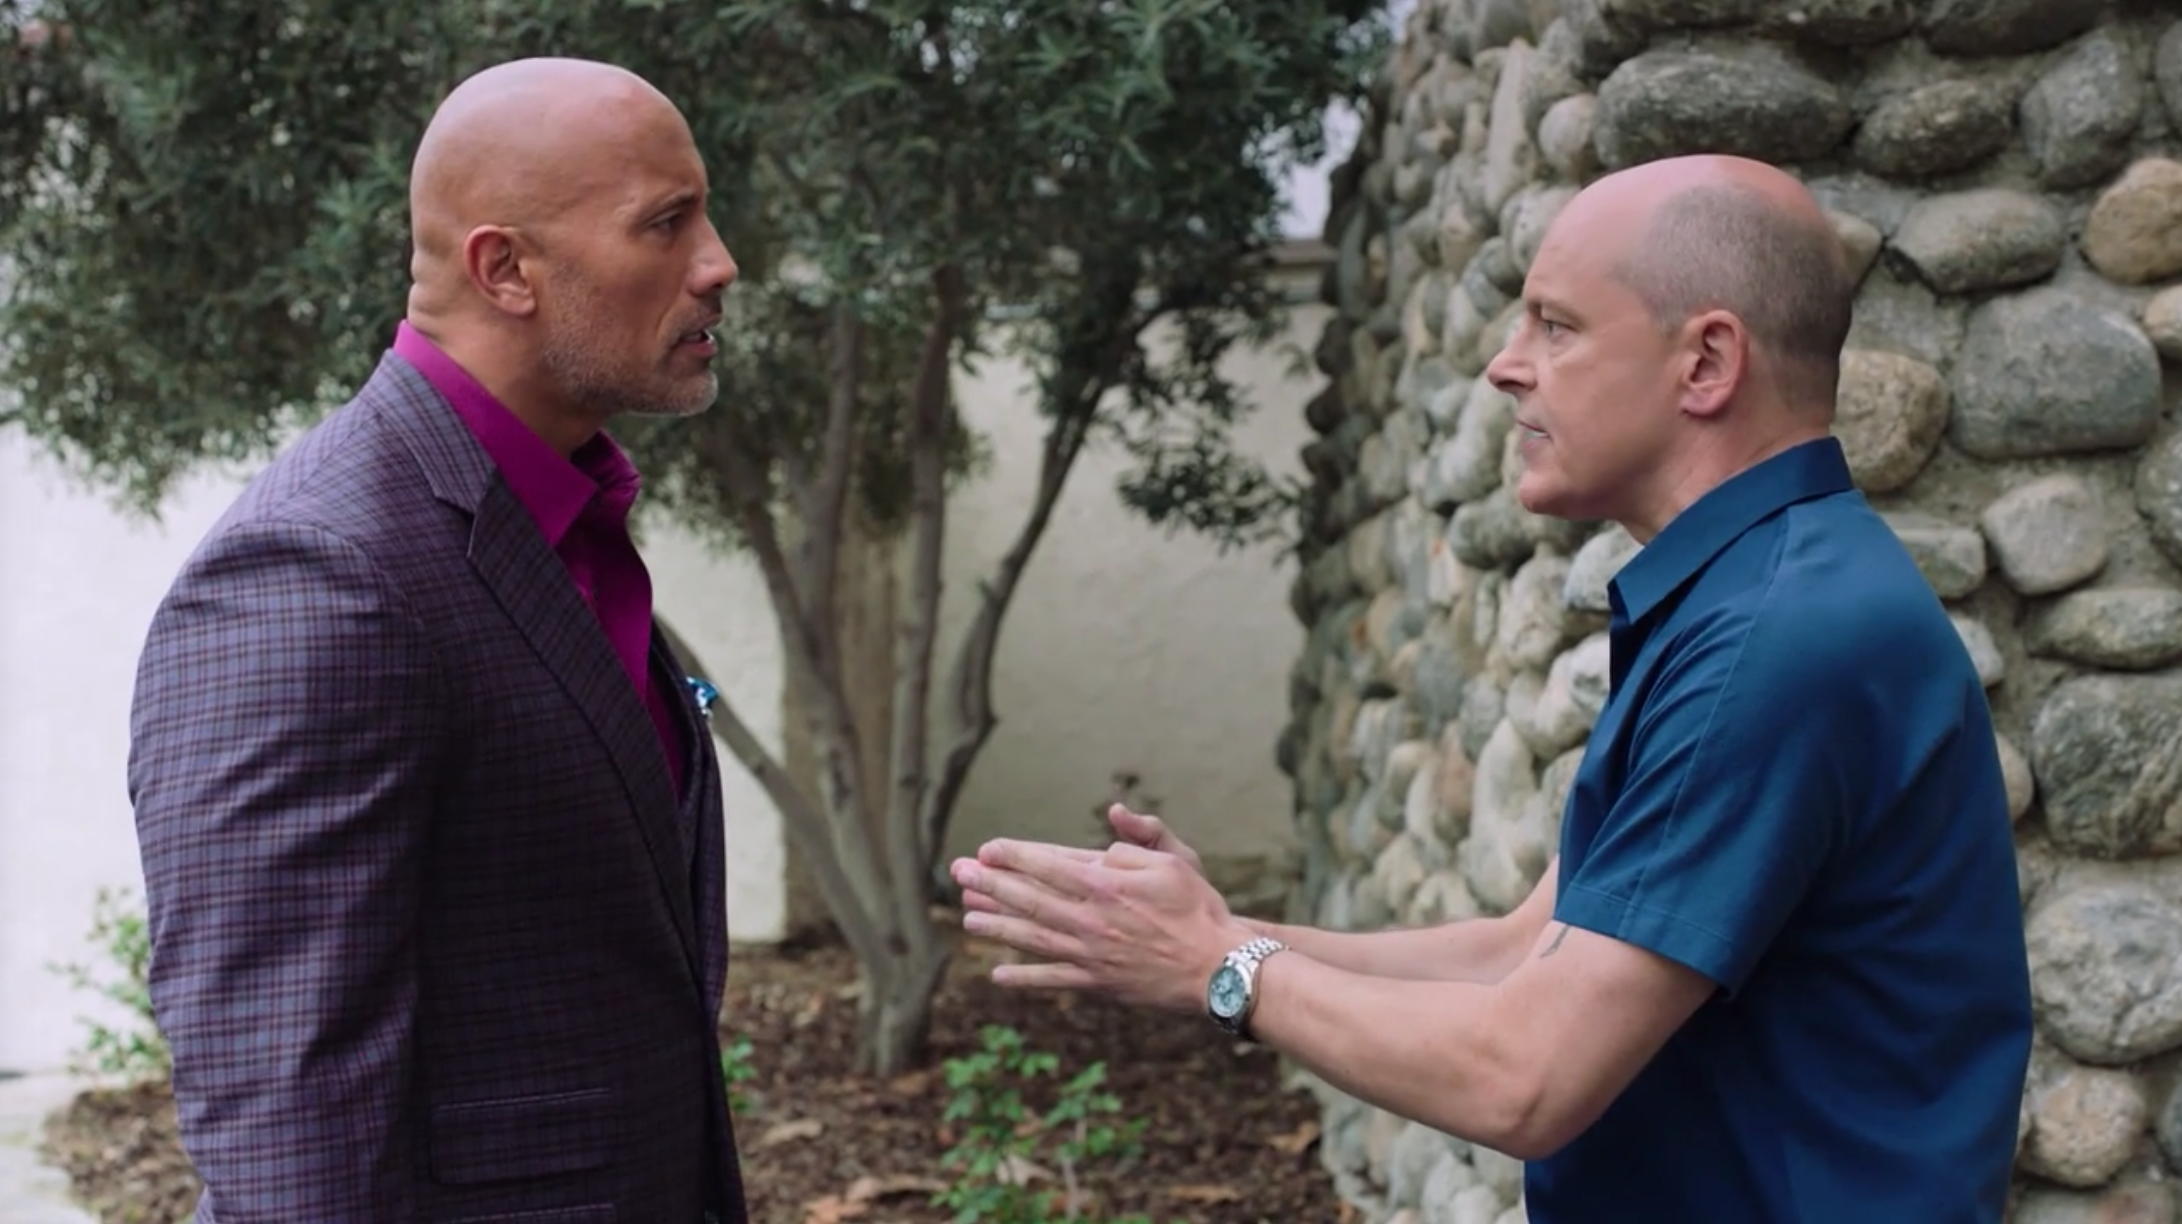 It’s strasmore v. The ncaa as ‘ballers’ wraps up season four